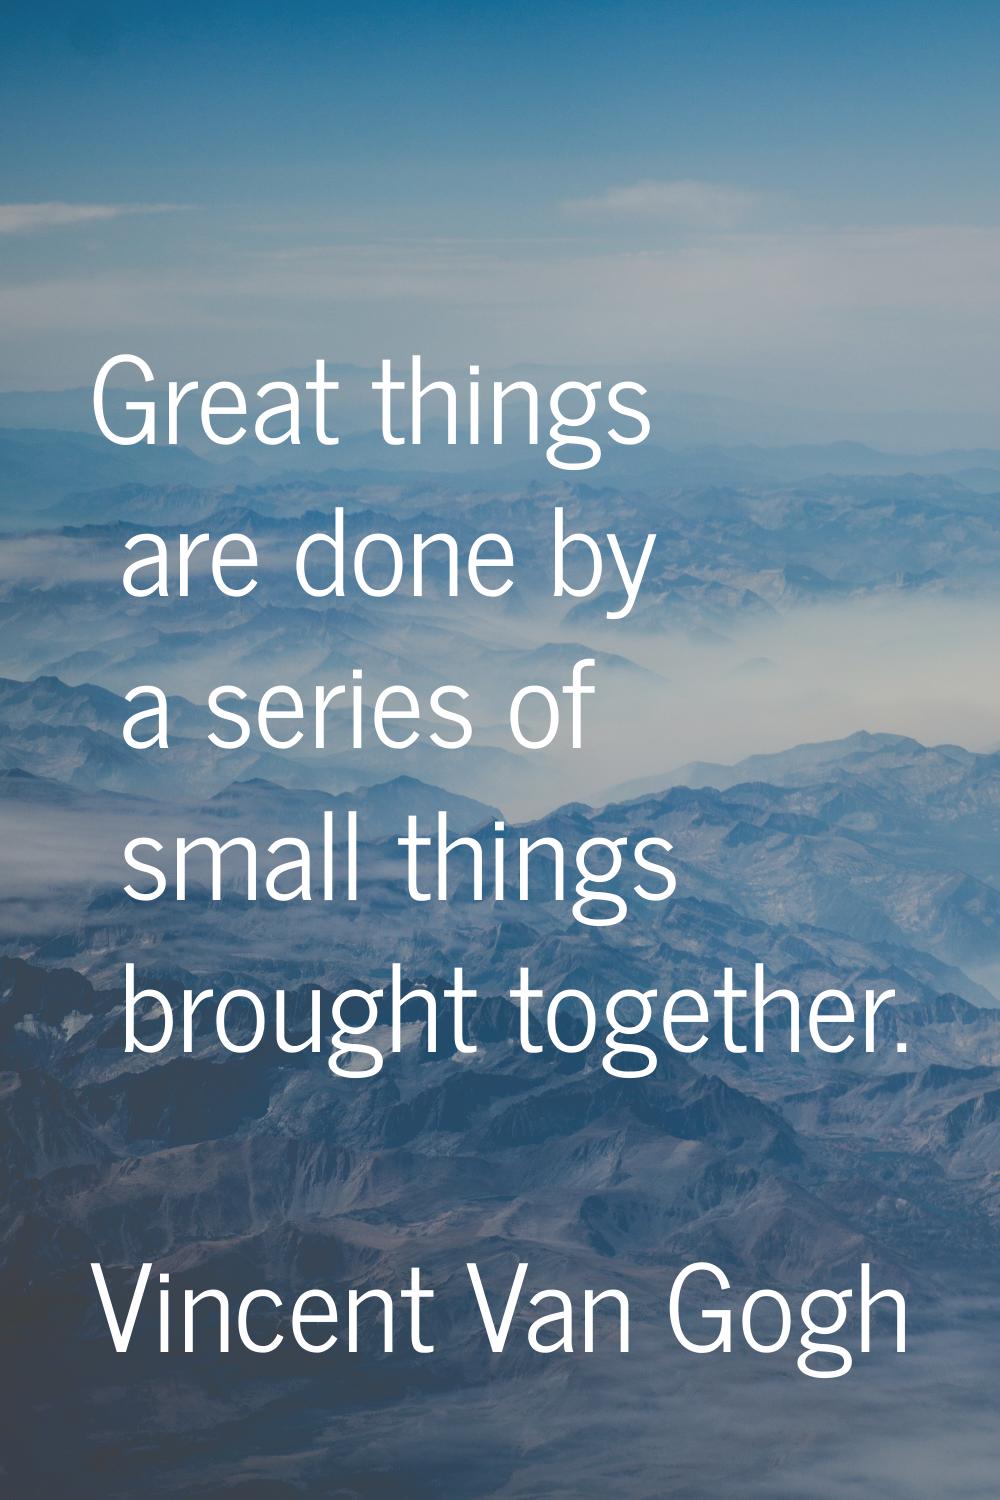 Great things are done by a series of small things brought together.